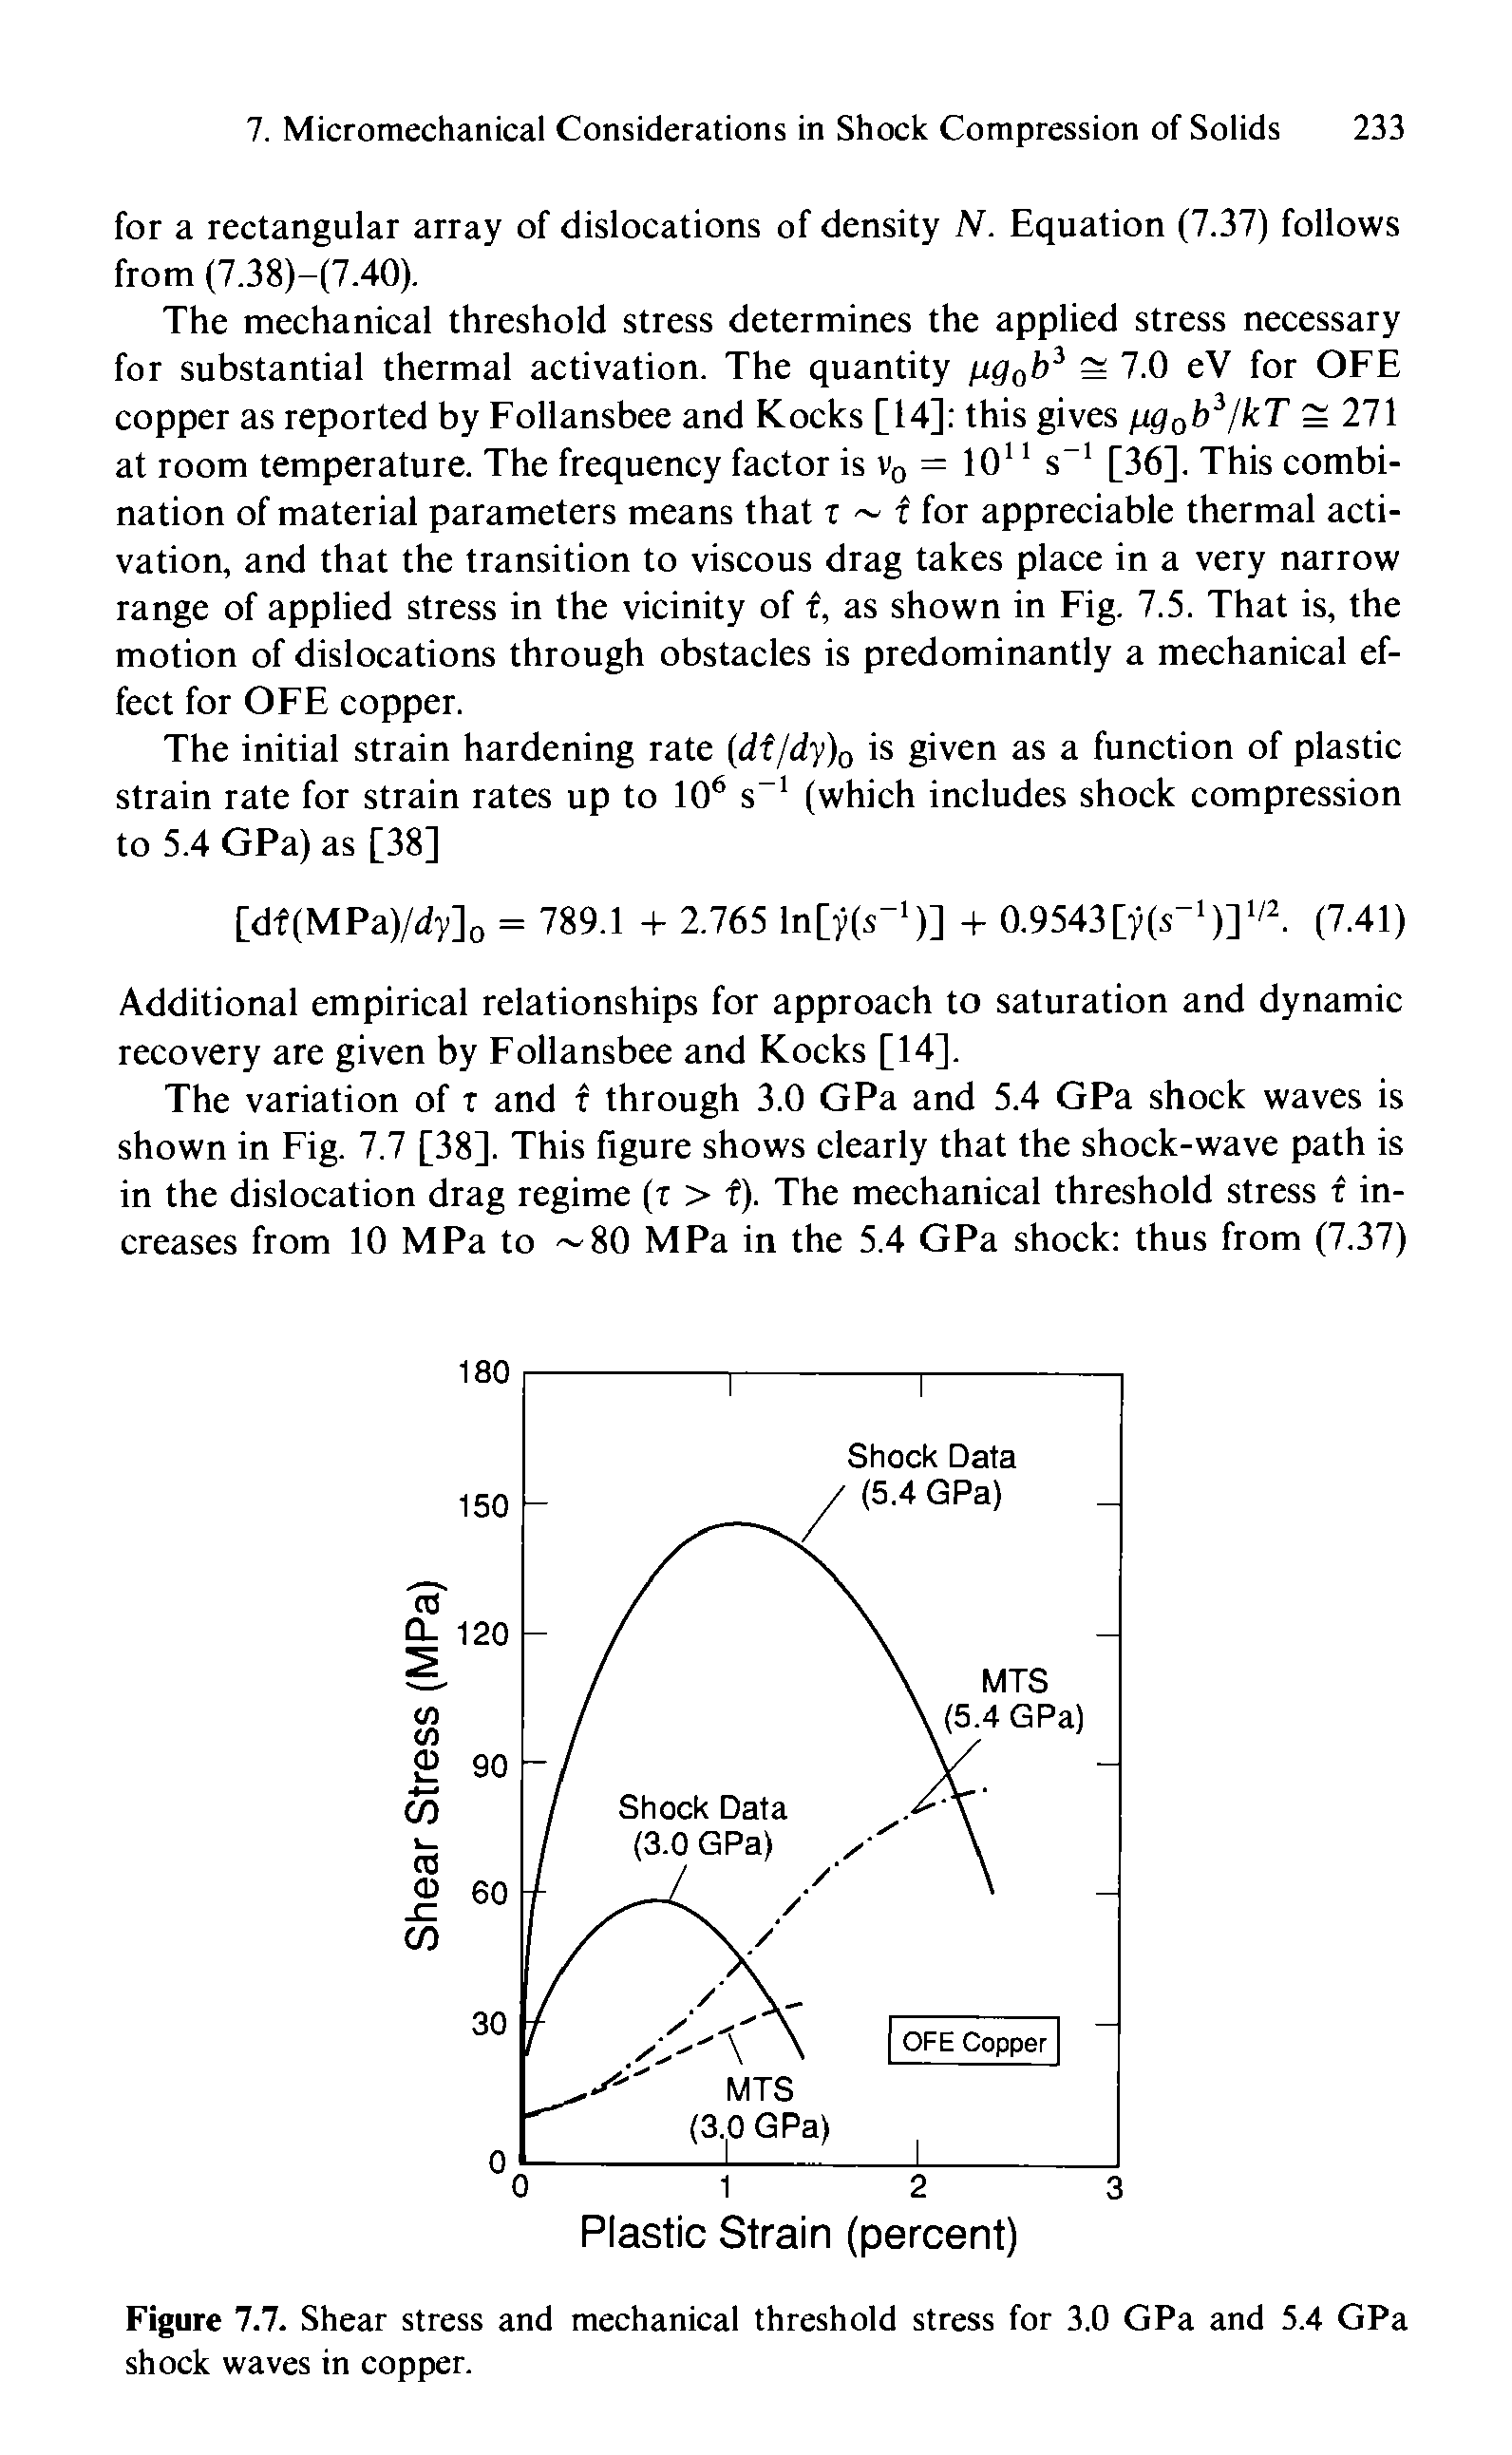 Figure 7.7. Shear stress and mechanical threshold stress for 3.0 GPa and 5.4 GPa shock waves in copper.